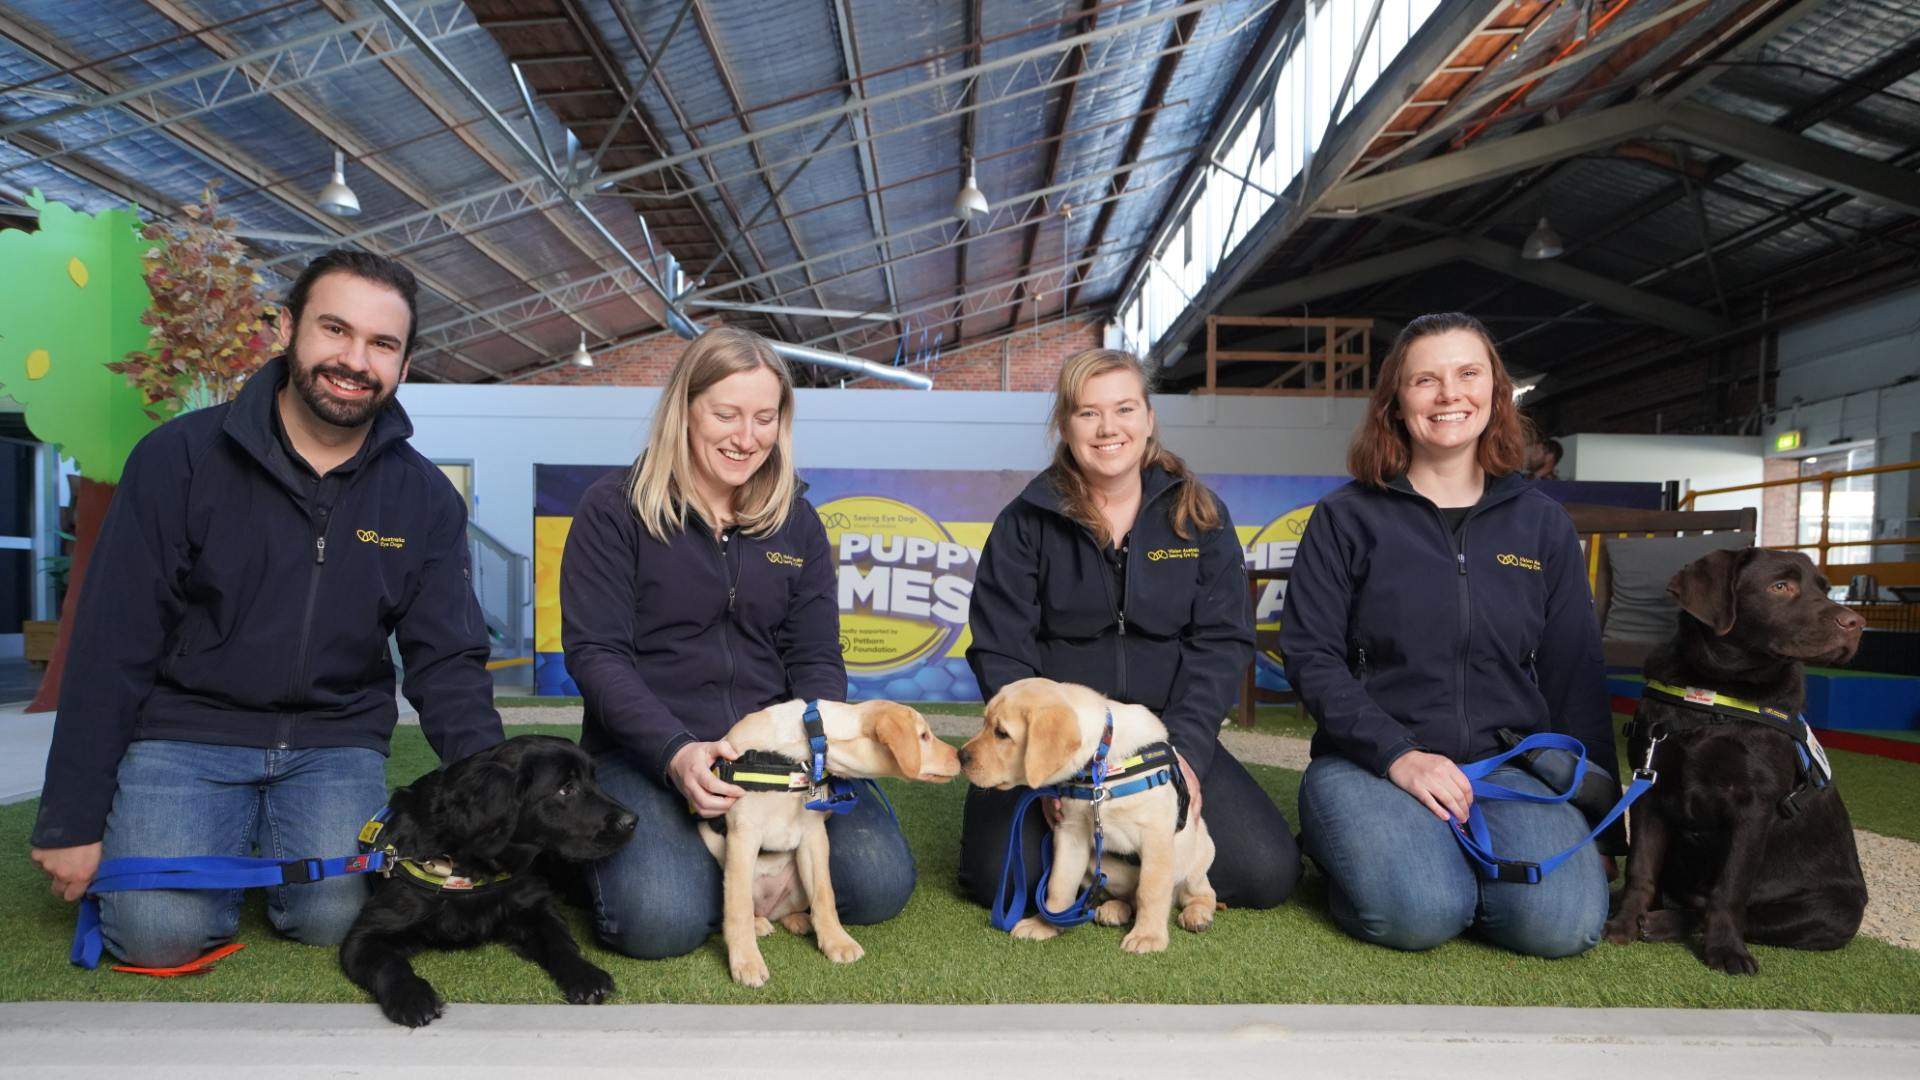 Seeing Eye Dogs' Puppy Games Is the Adorable Contest That Swaps Athletes for Guide Dog Trainees